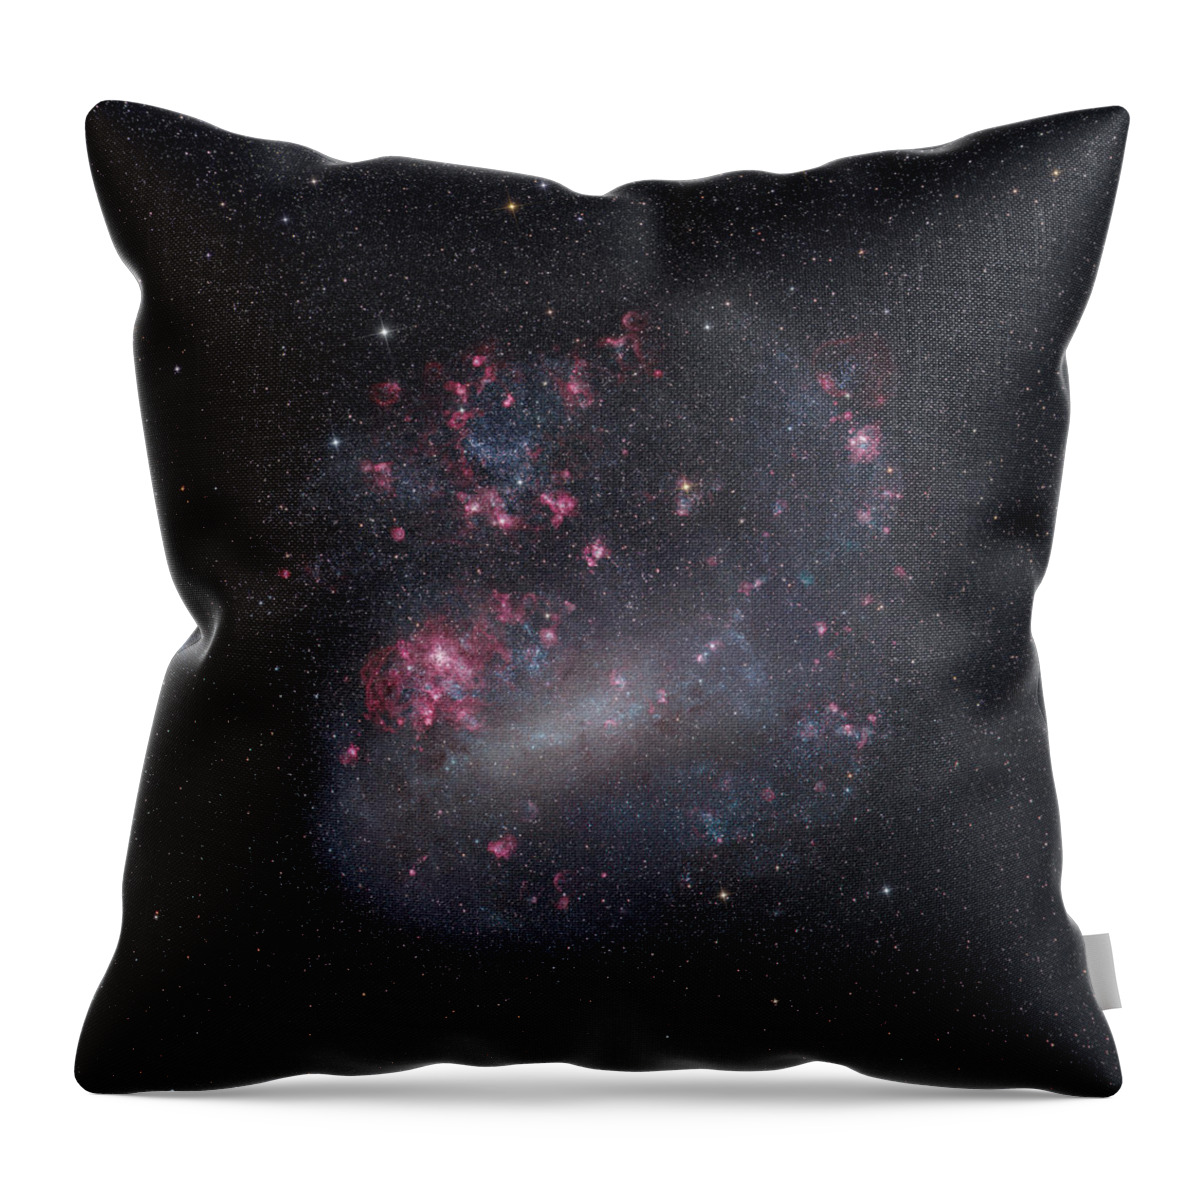 Galaxy Throw Pillow featuring the photograph Large Magellanic Cloud by Image By Marco Lorenzi, Www.glitteringlights.com